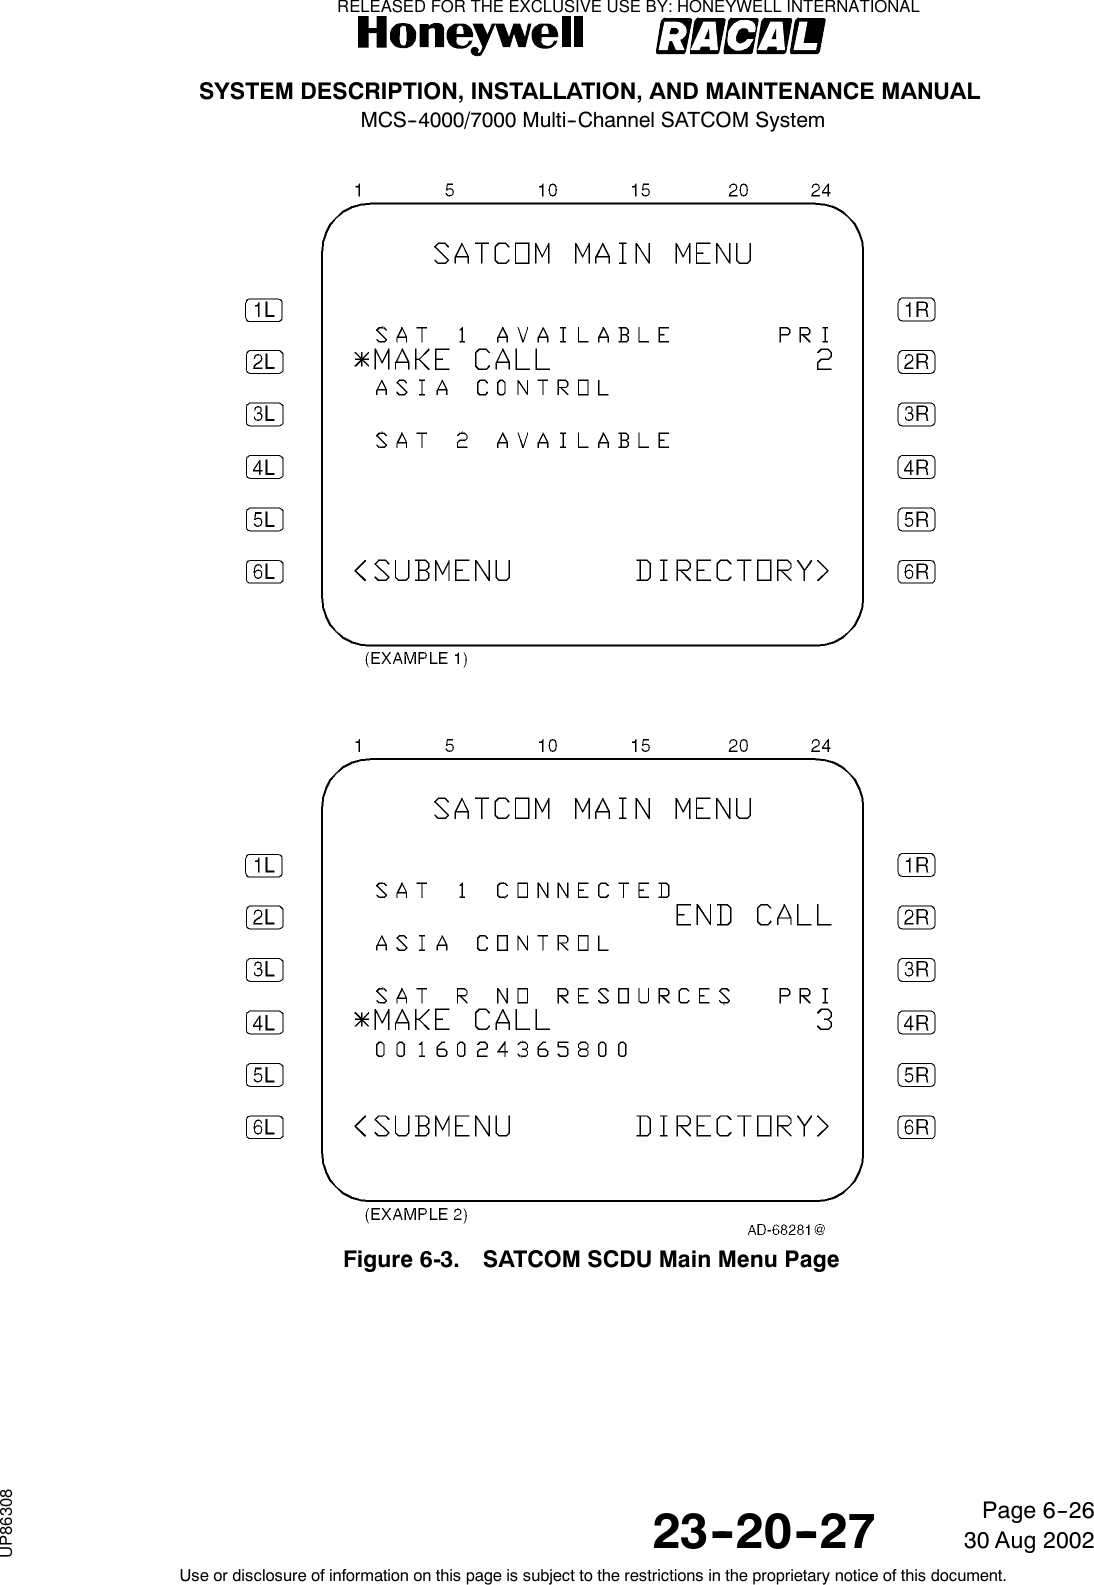 SYSTEM DESCRIPTION, INSTALLATION, AND MAINTENANCE MANUALMCS--4000/7000 Multi--Channel SATCOM System23--20--2730 Aug 2002Use or disclosure of information on this page is subject to the restrictions in the proprietary notice of this document.Page 6--26Figure 6-3. SATCOM SCDU Main Menu PageRELEASED FOR THE EXCLUSIVE USE BY: HONEYWELL INTERNATIONALUP86308